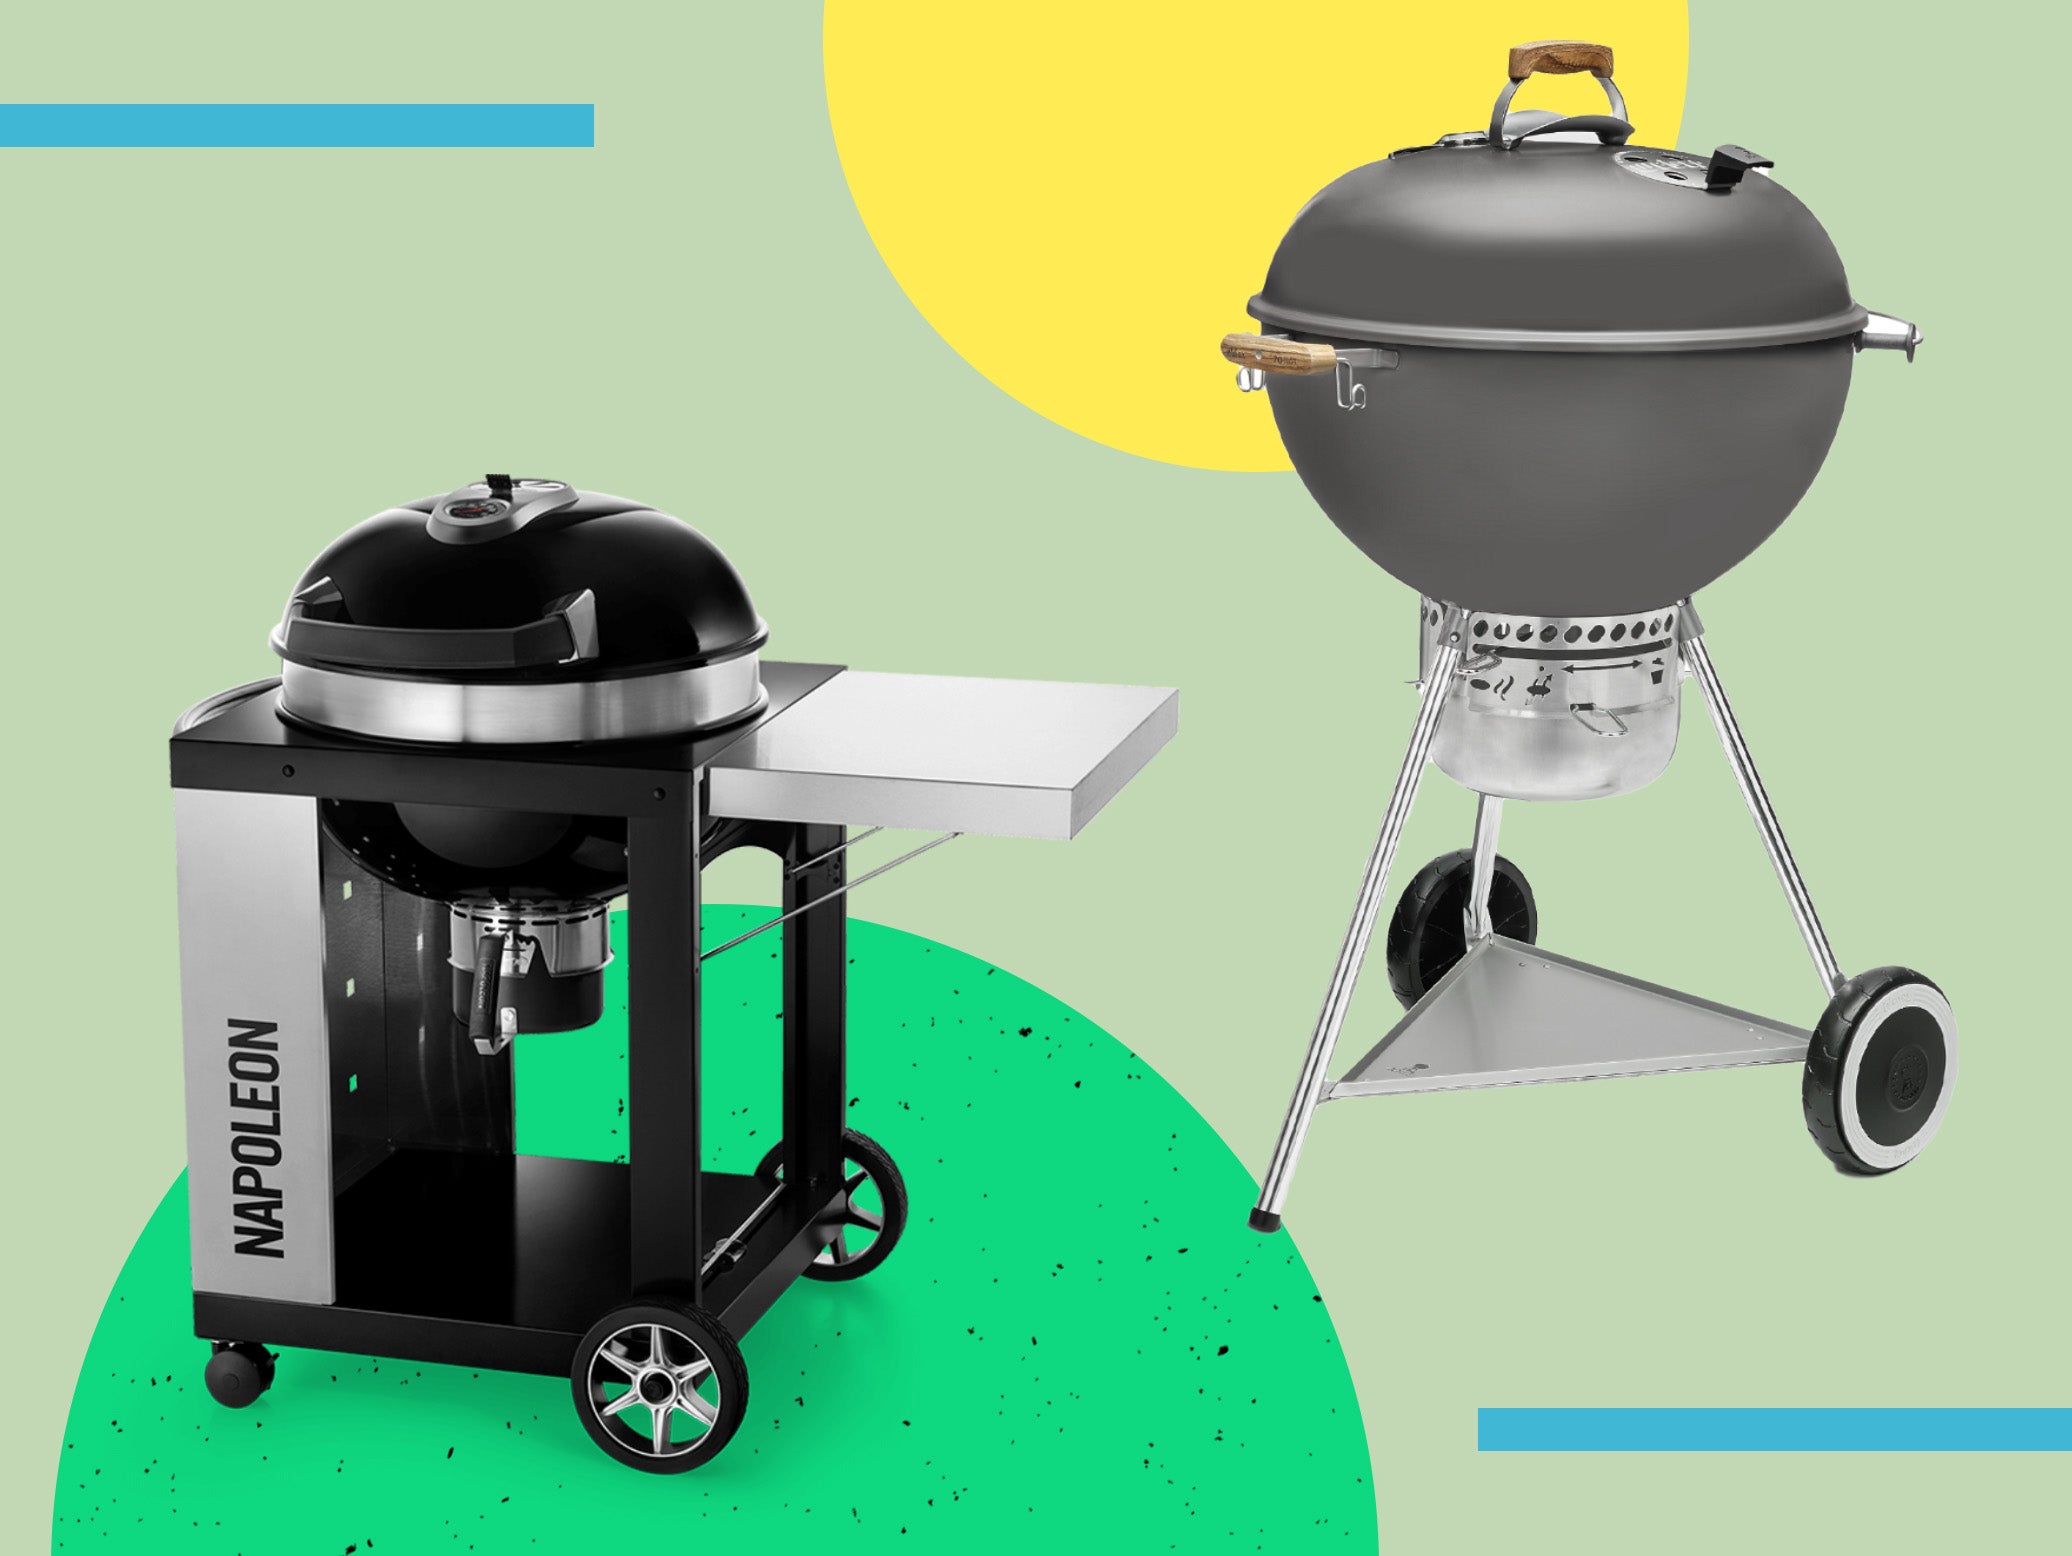 Best charcoal BBQ 2023 Kamado grill, Asado grill and charcoal barbecue